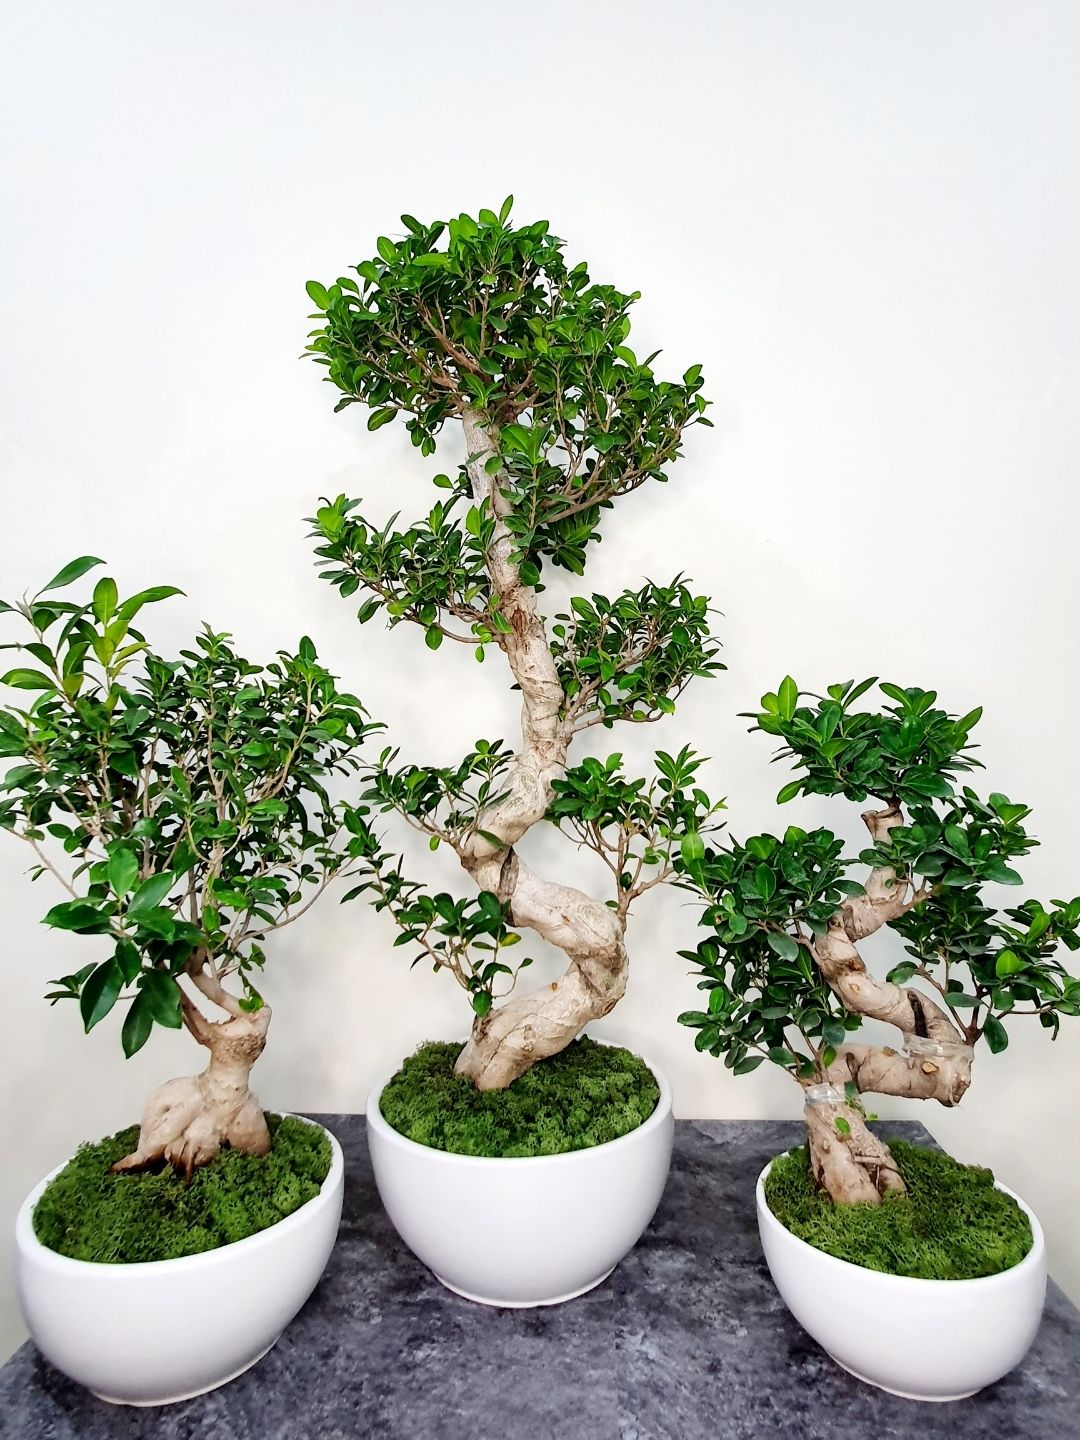 Potted XL Bonsai Tree - S Shape Planted in Ceramic Tall White Pot with Pebbles Topping